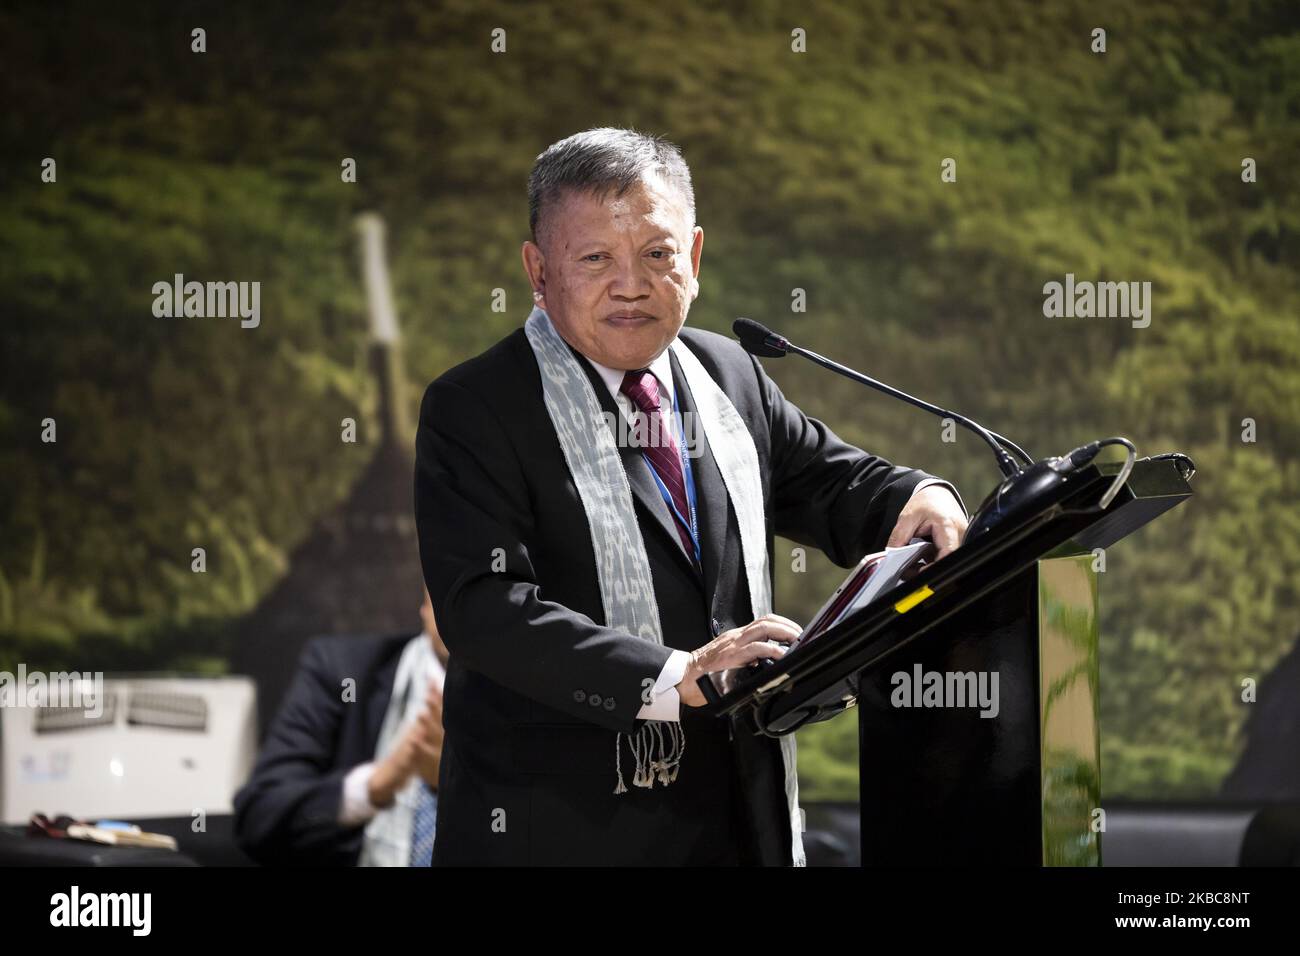 Ir. Kustanta Budi Prihatno talks during the Conference of the Parties to the United Nations Framework Convention on Climate Change -COP25 on day 6, in December 6, 2019 in Madrid, Spain. (Photo by Rita Franca/NurPhoto) Stock Photo